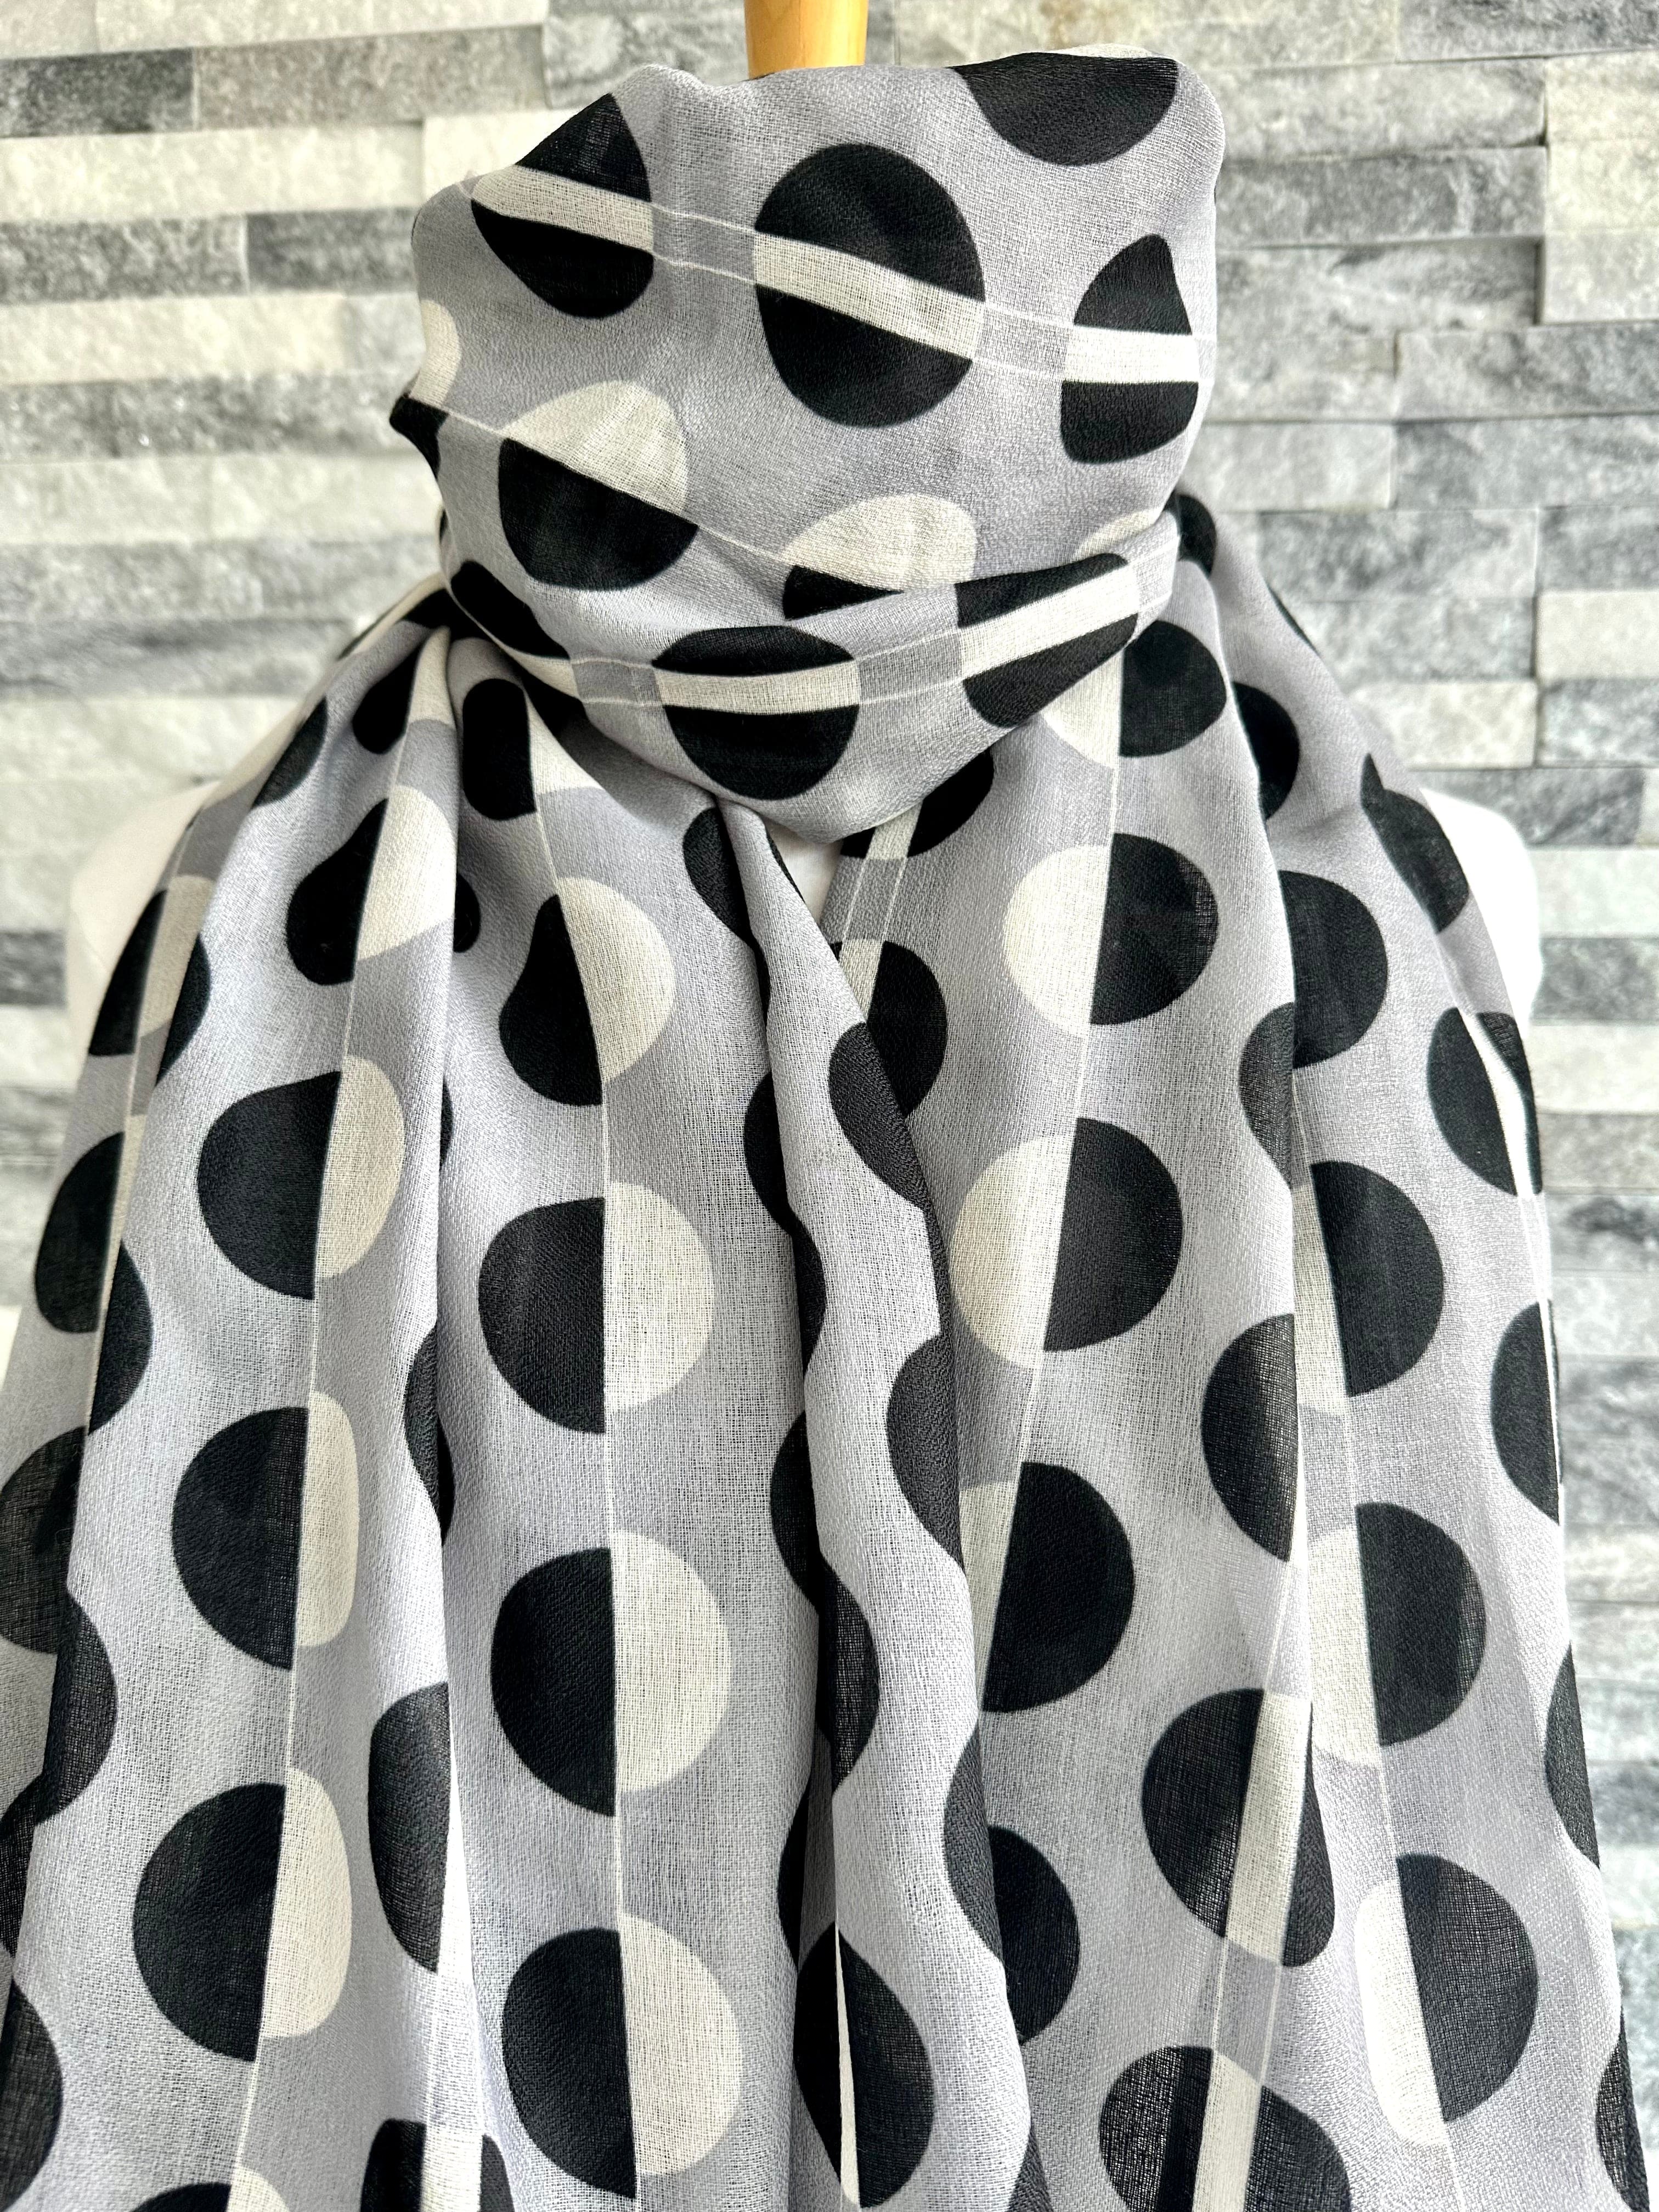 lusciousscarves Apparel & Accessories Black, Grey and White Shaded Circles Scarf